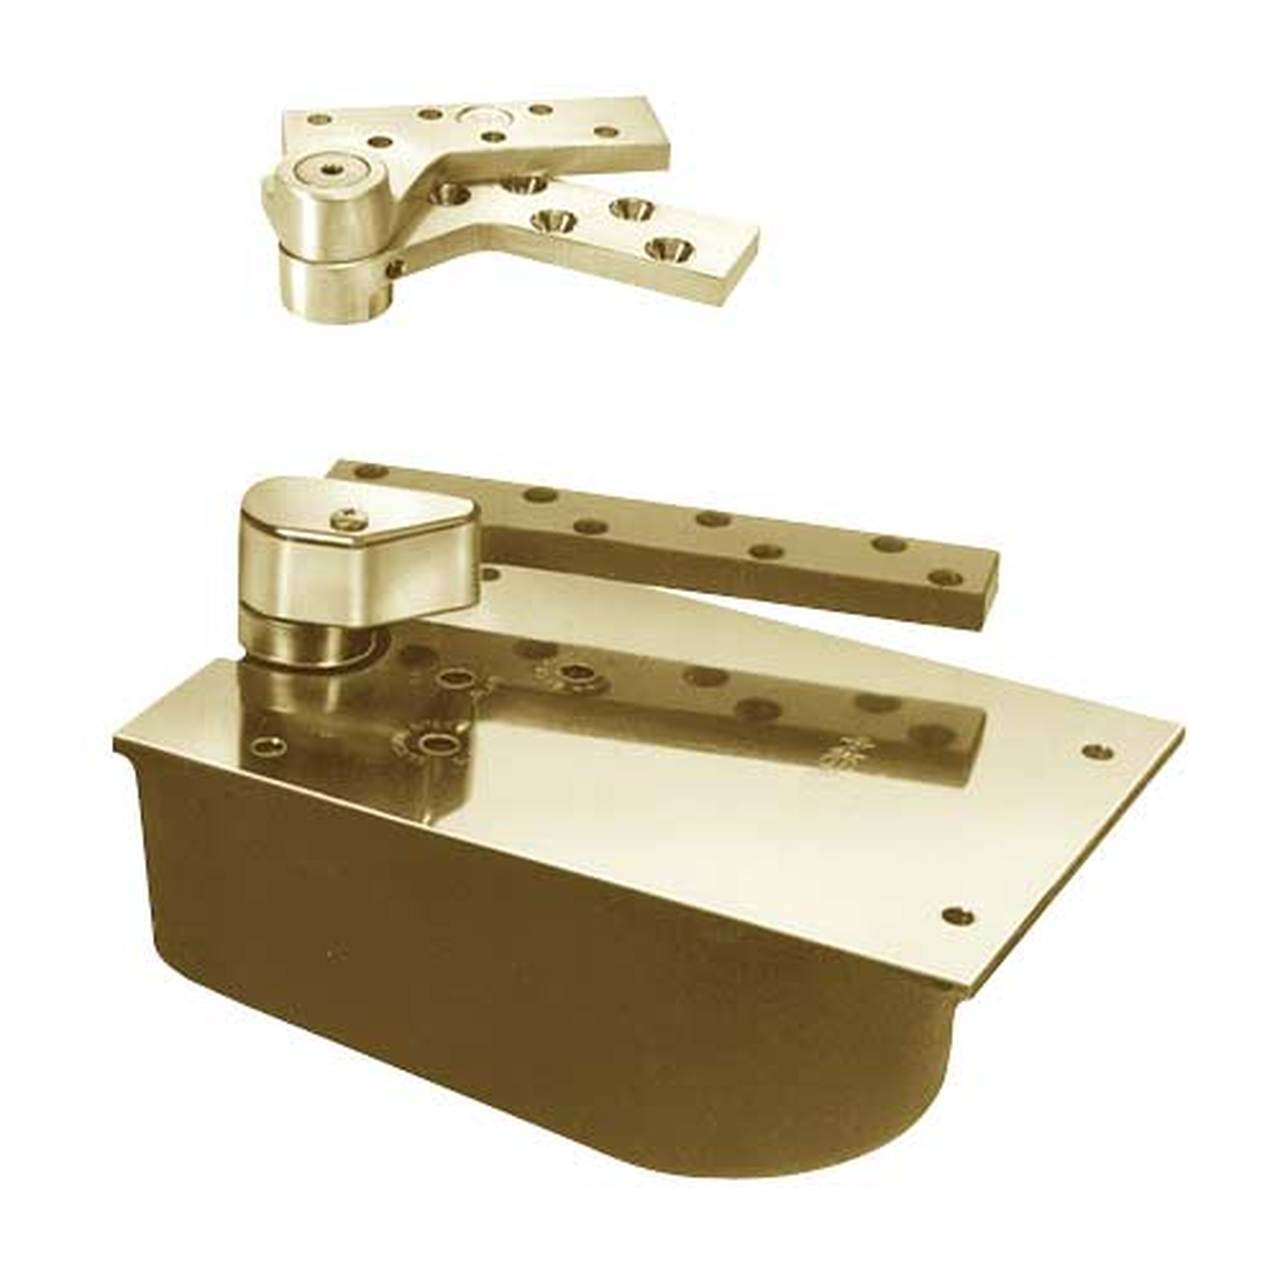 L27-95N-LFP-LCC-RH-1-3/4-606 Rixson 27 Series Extra Heavy Duty Lead Lined Offset Floor Closer in Satin Brass Finish